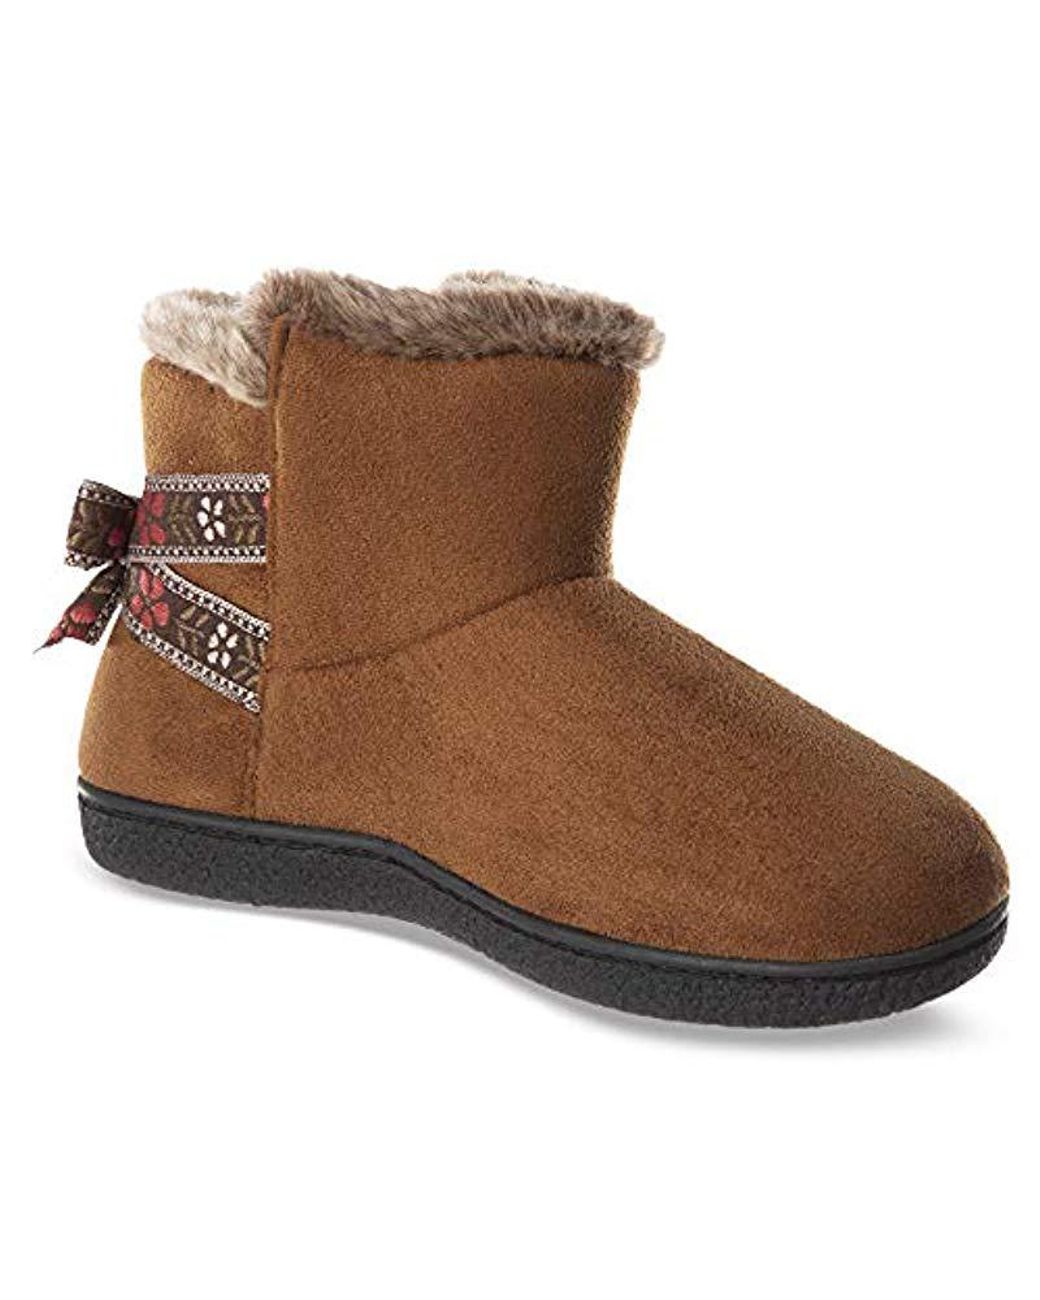 isotoner Womens Memory Foam Nora Boot/ Faux Fur and Bow Detail with Indoor Outdoor Comfort Sole Slipper